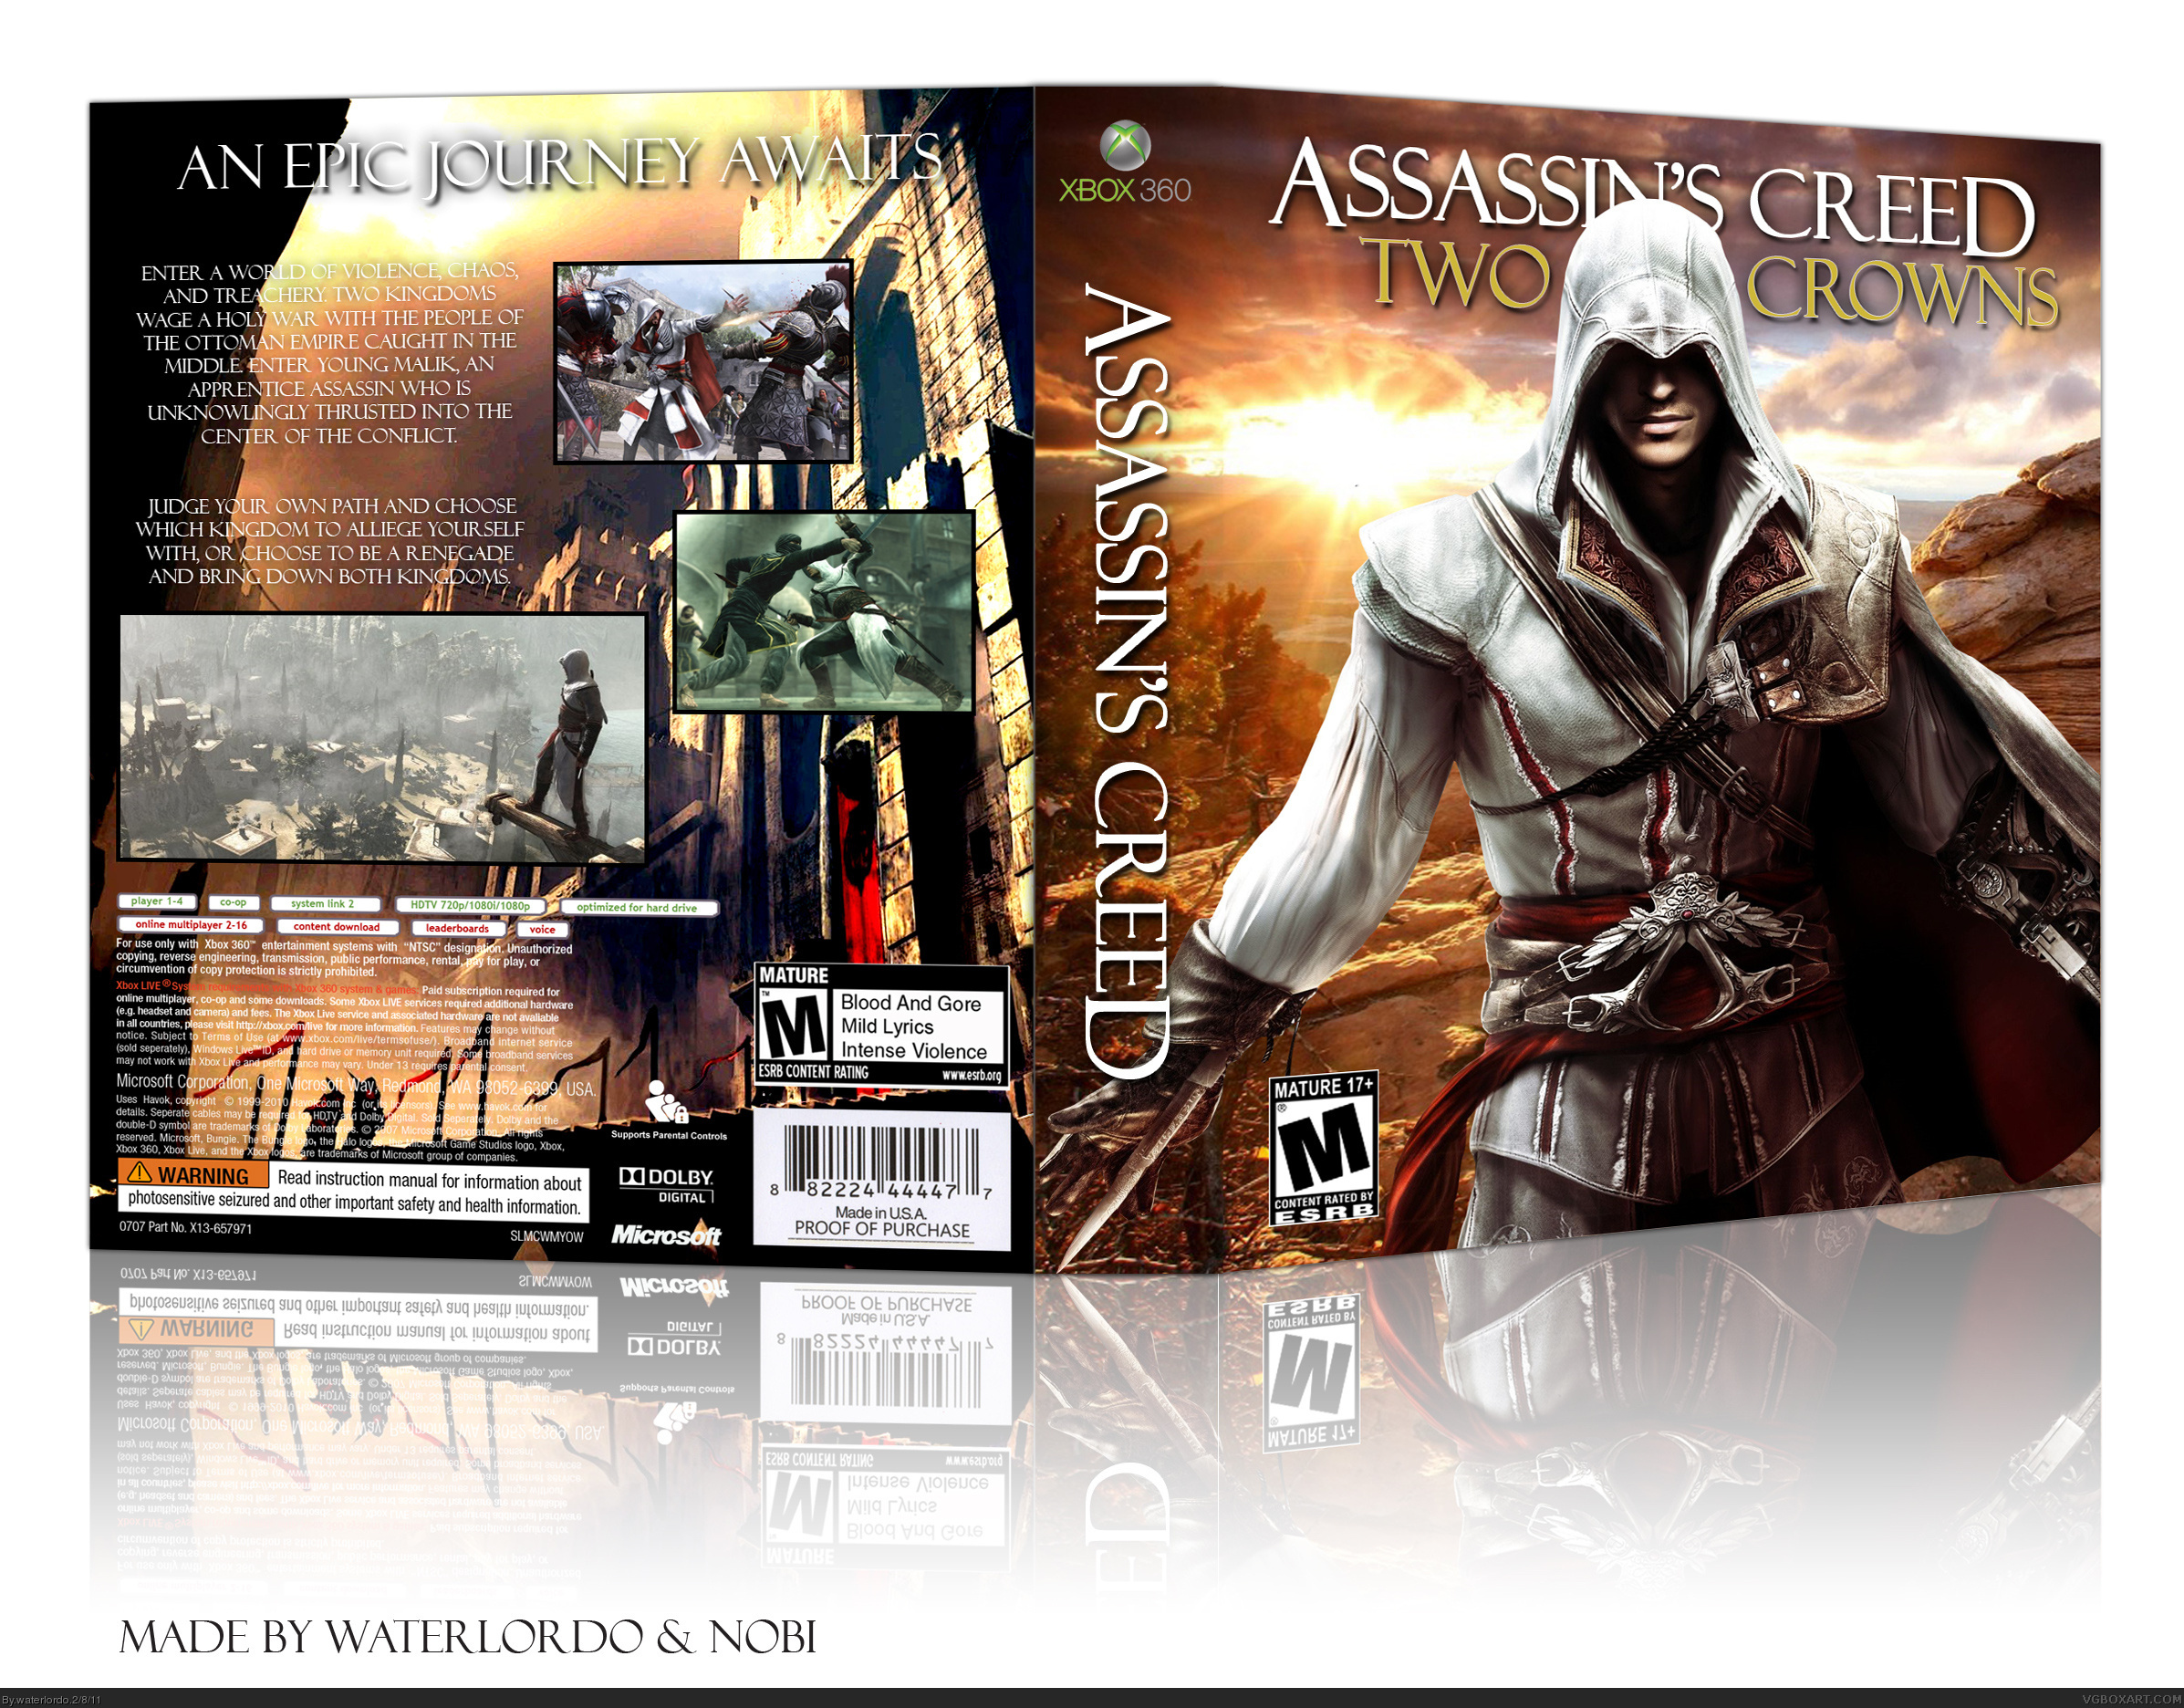 Assassin's Creed: Two Crowns box cover